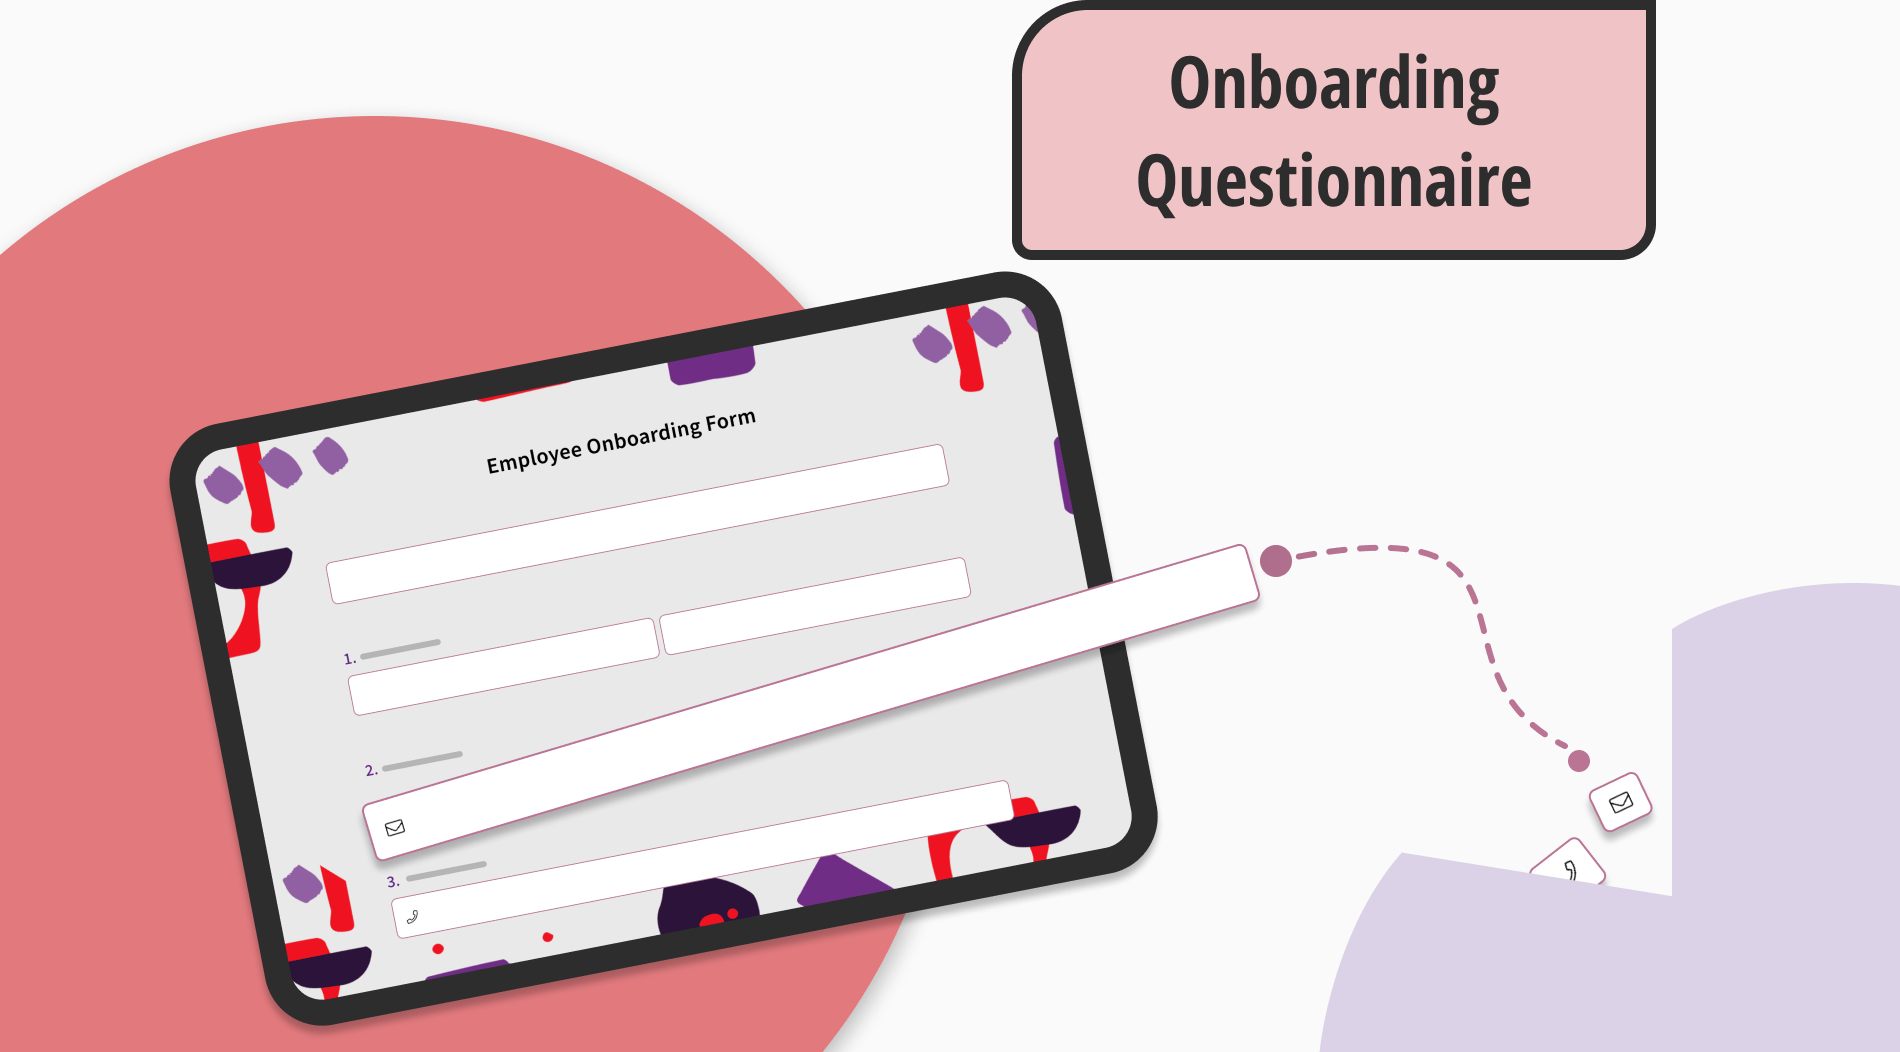 Onboarding questionnaire: Definition, questions & tips